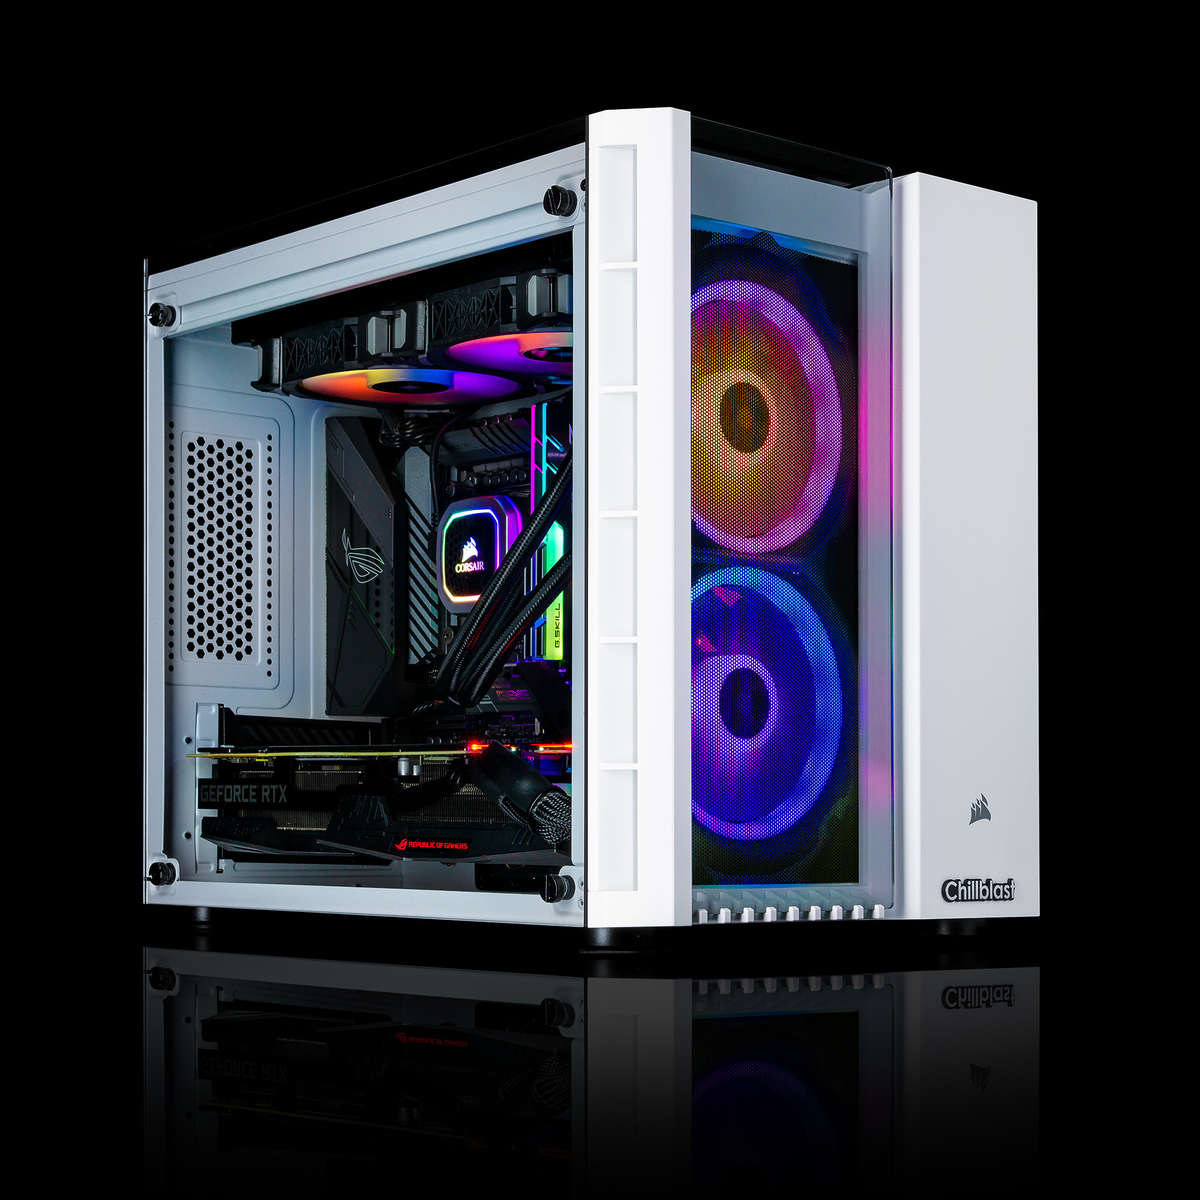 Image of the Chillblast Fusion Crystal Gaming PC against a dark background